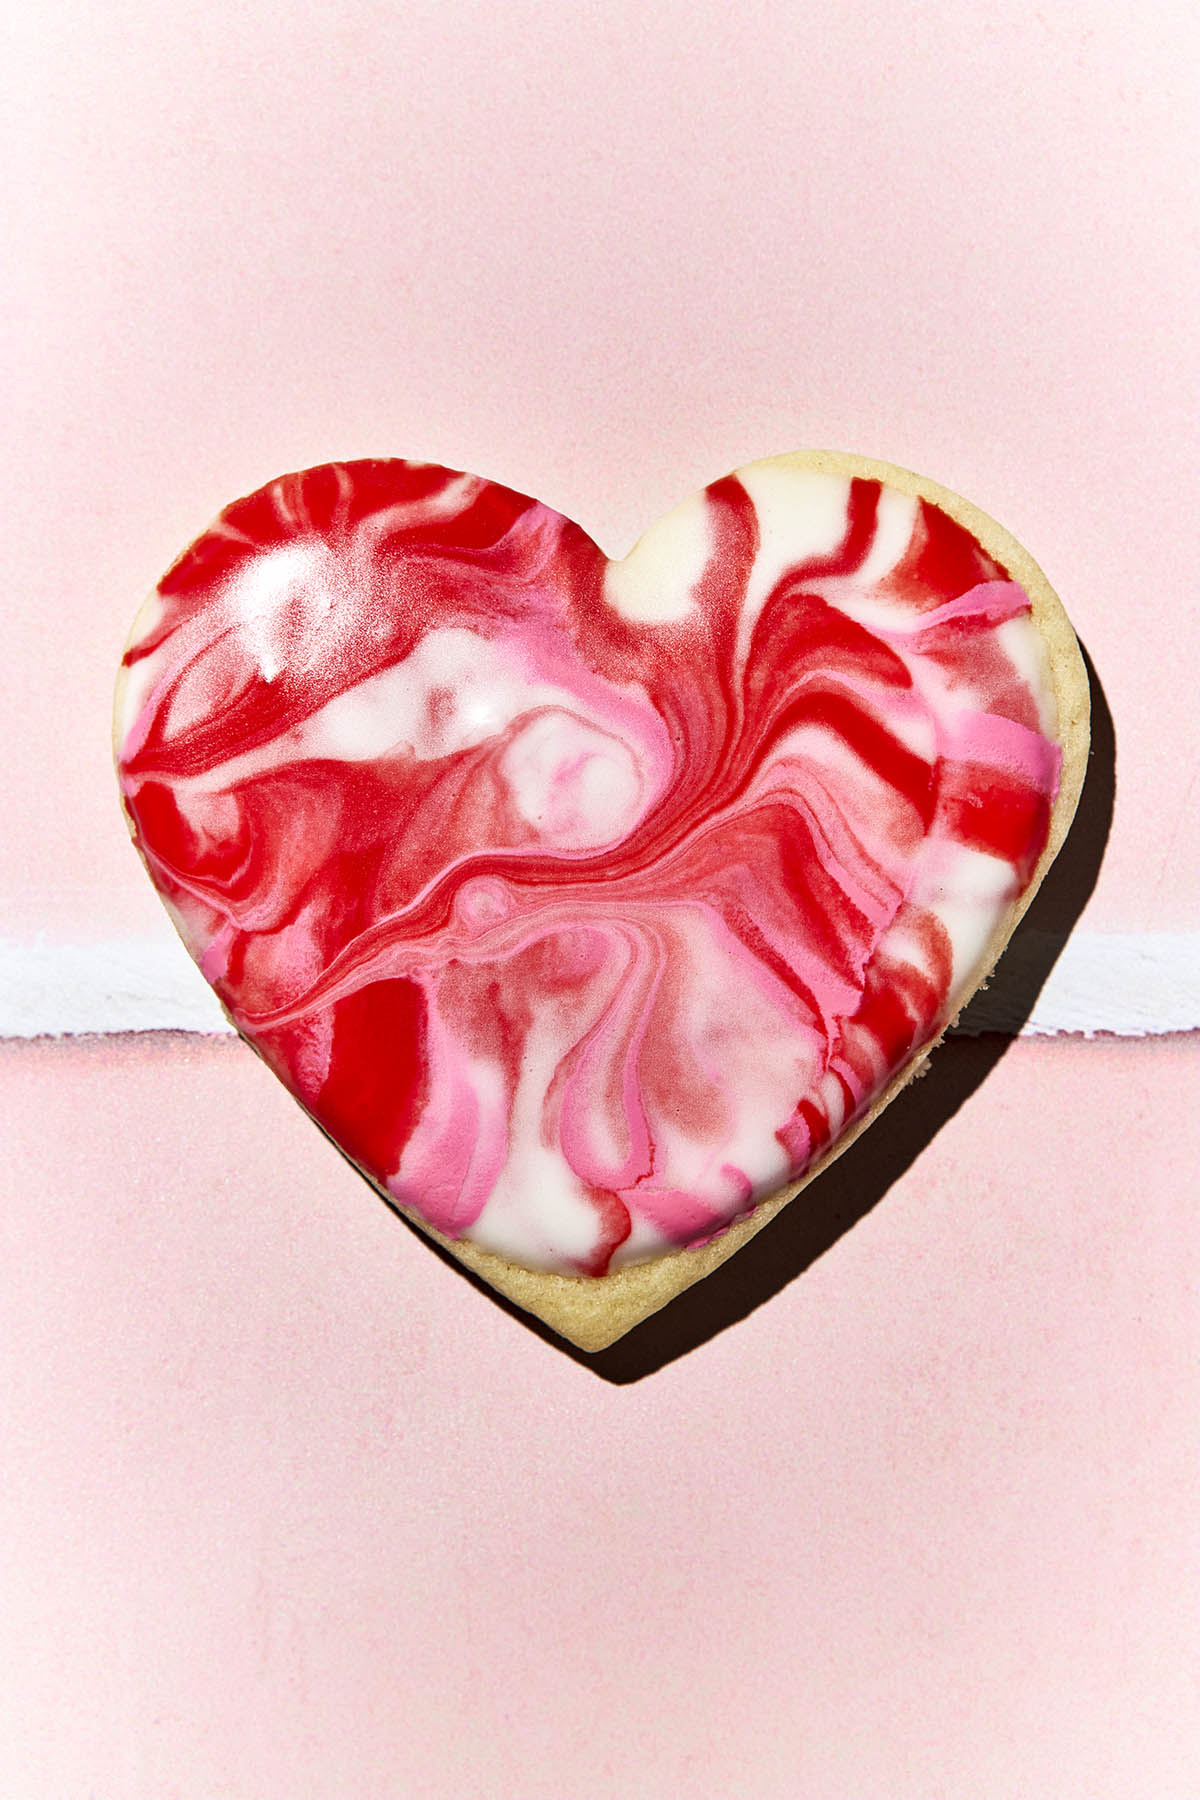 A heart-shaped cookie with marbled red, white, and pink icing.